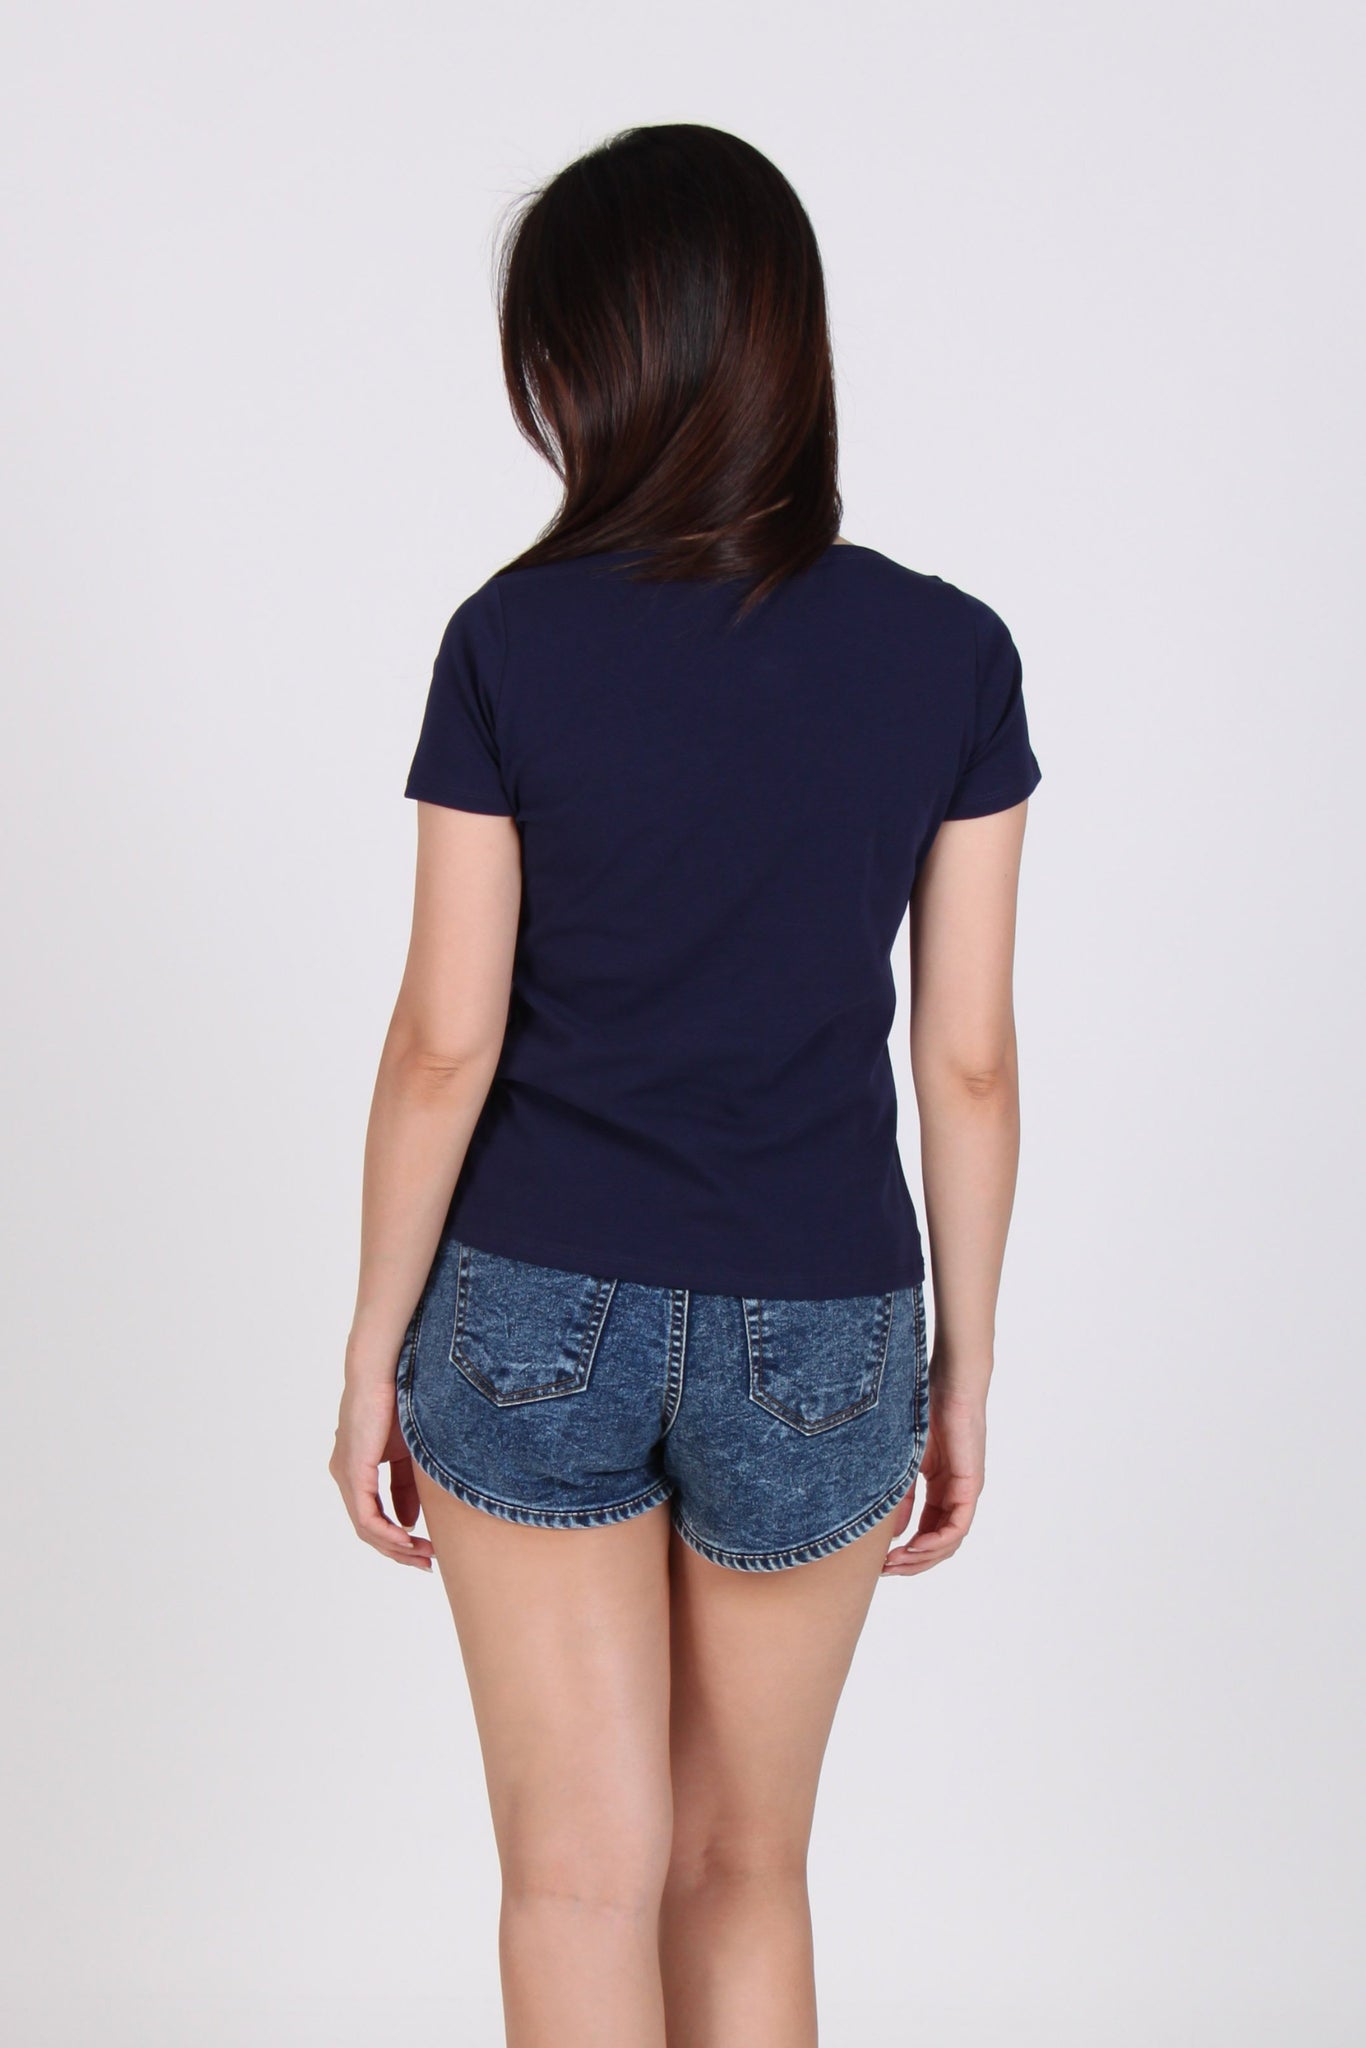 Basic Boat Neck Short Sleeve Cotton Top In Navy Blue